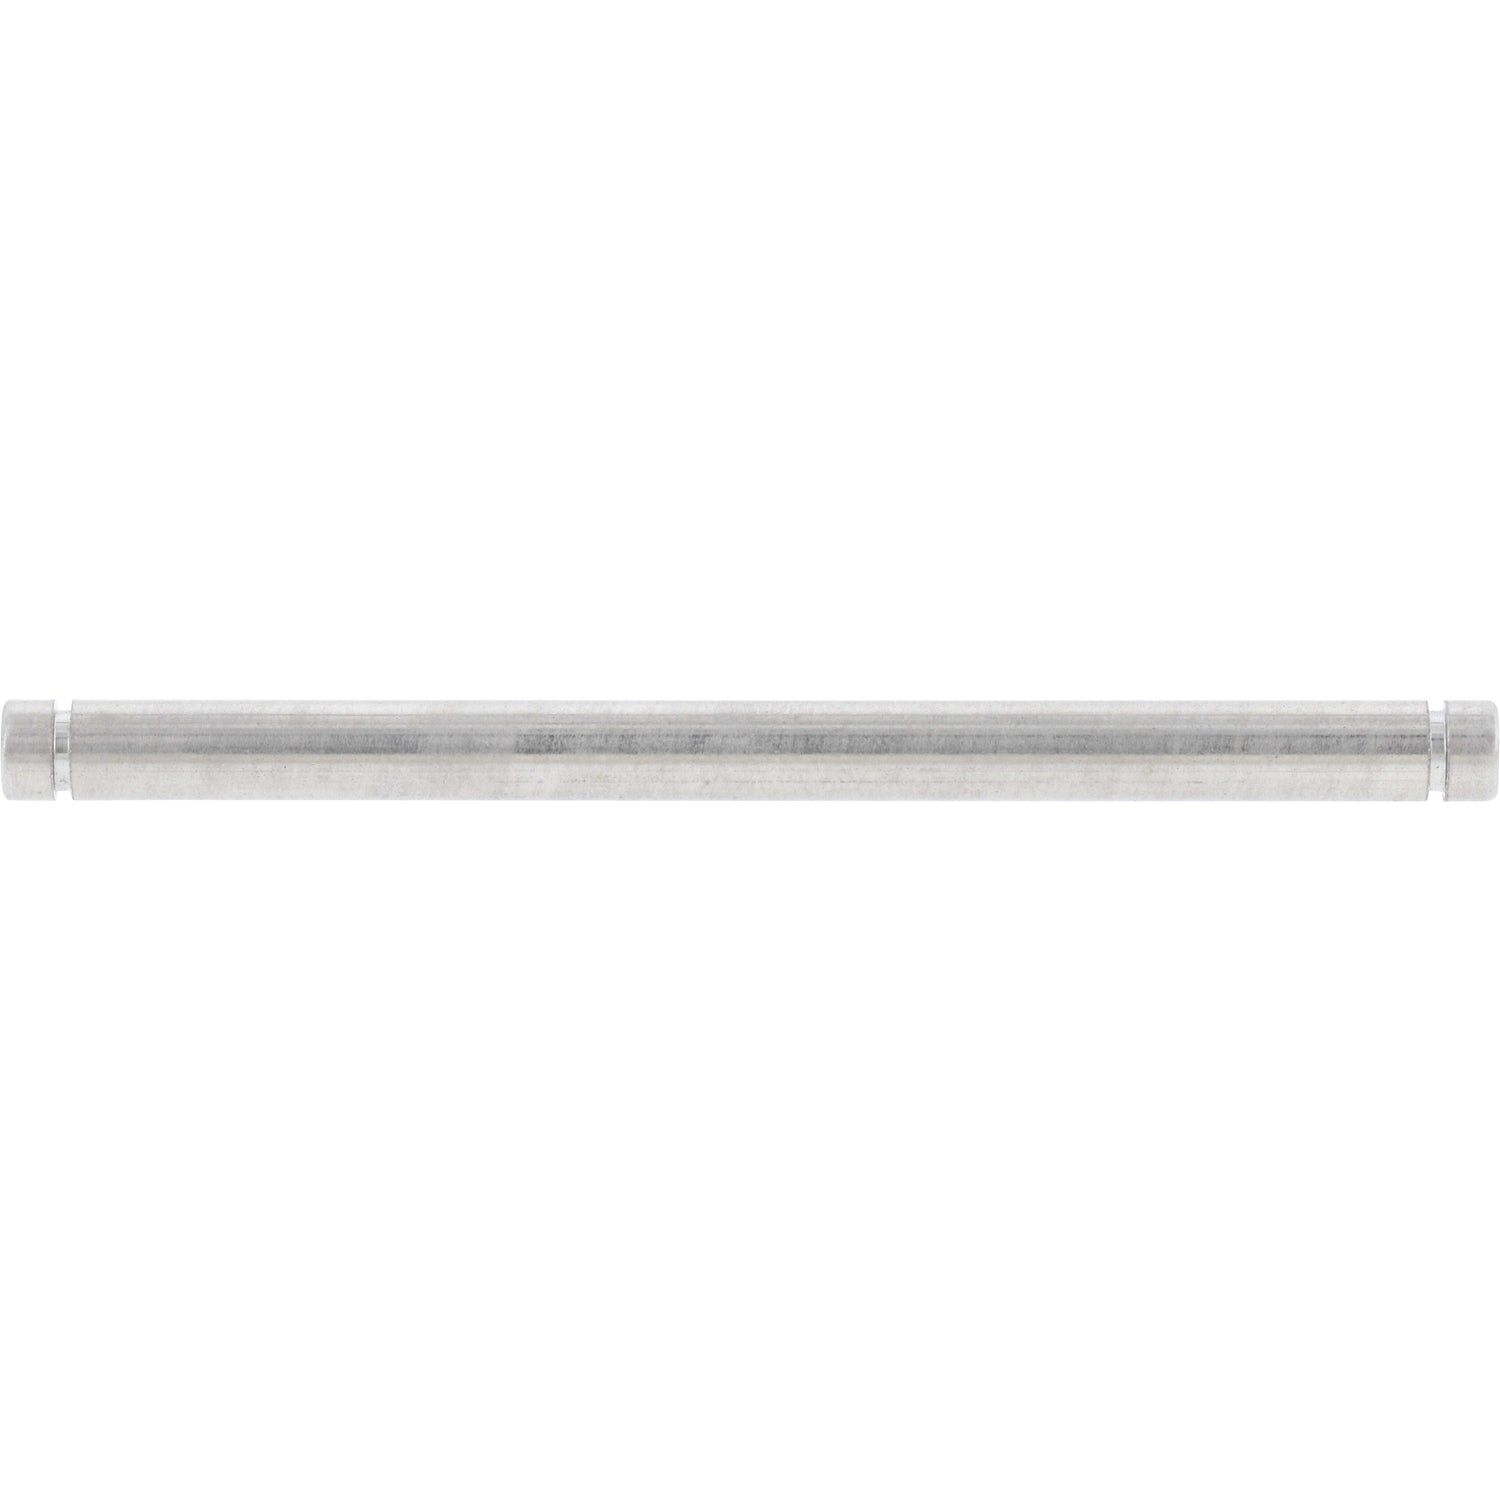 Stainless steel cylindrical dowel with a small notch cut into each end. Shown on white background. 